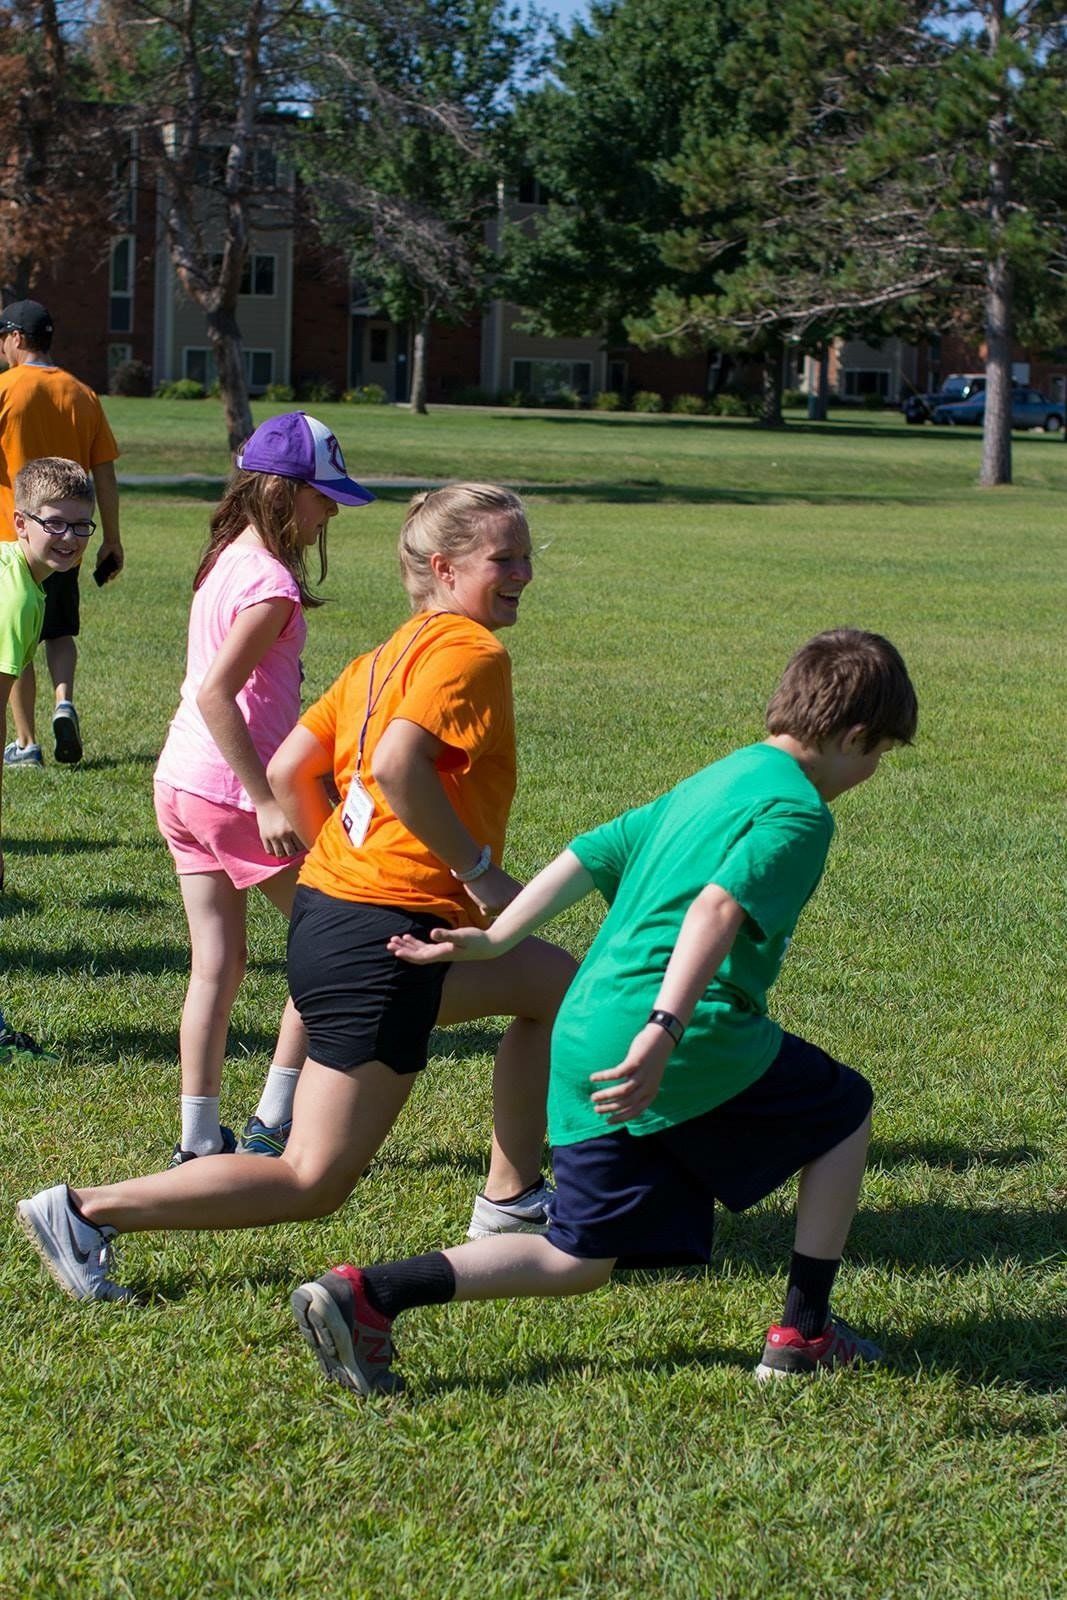 Group of young athletes doing lunges across a grassy field on a sunny day.